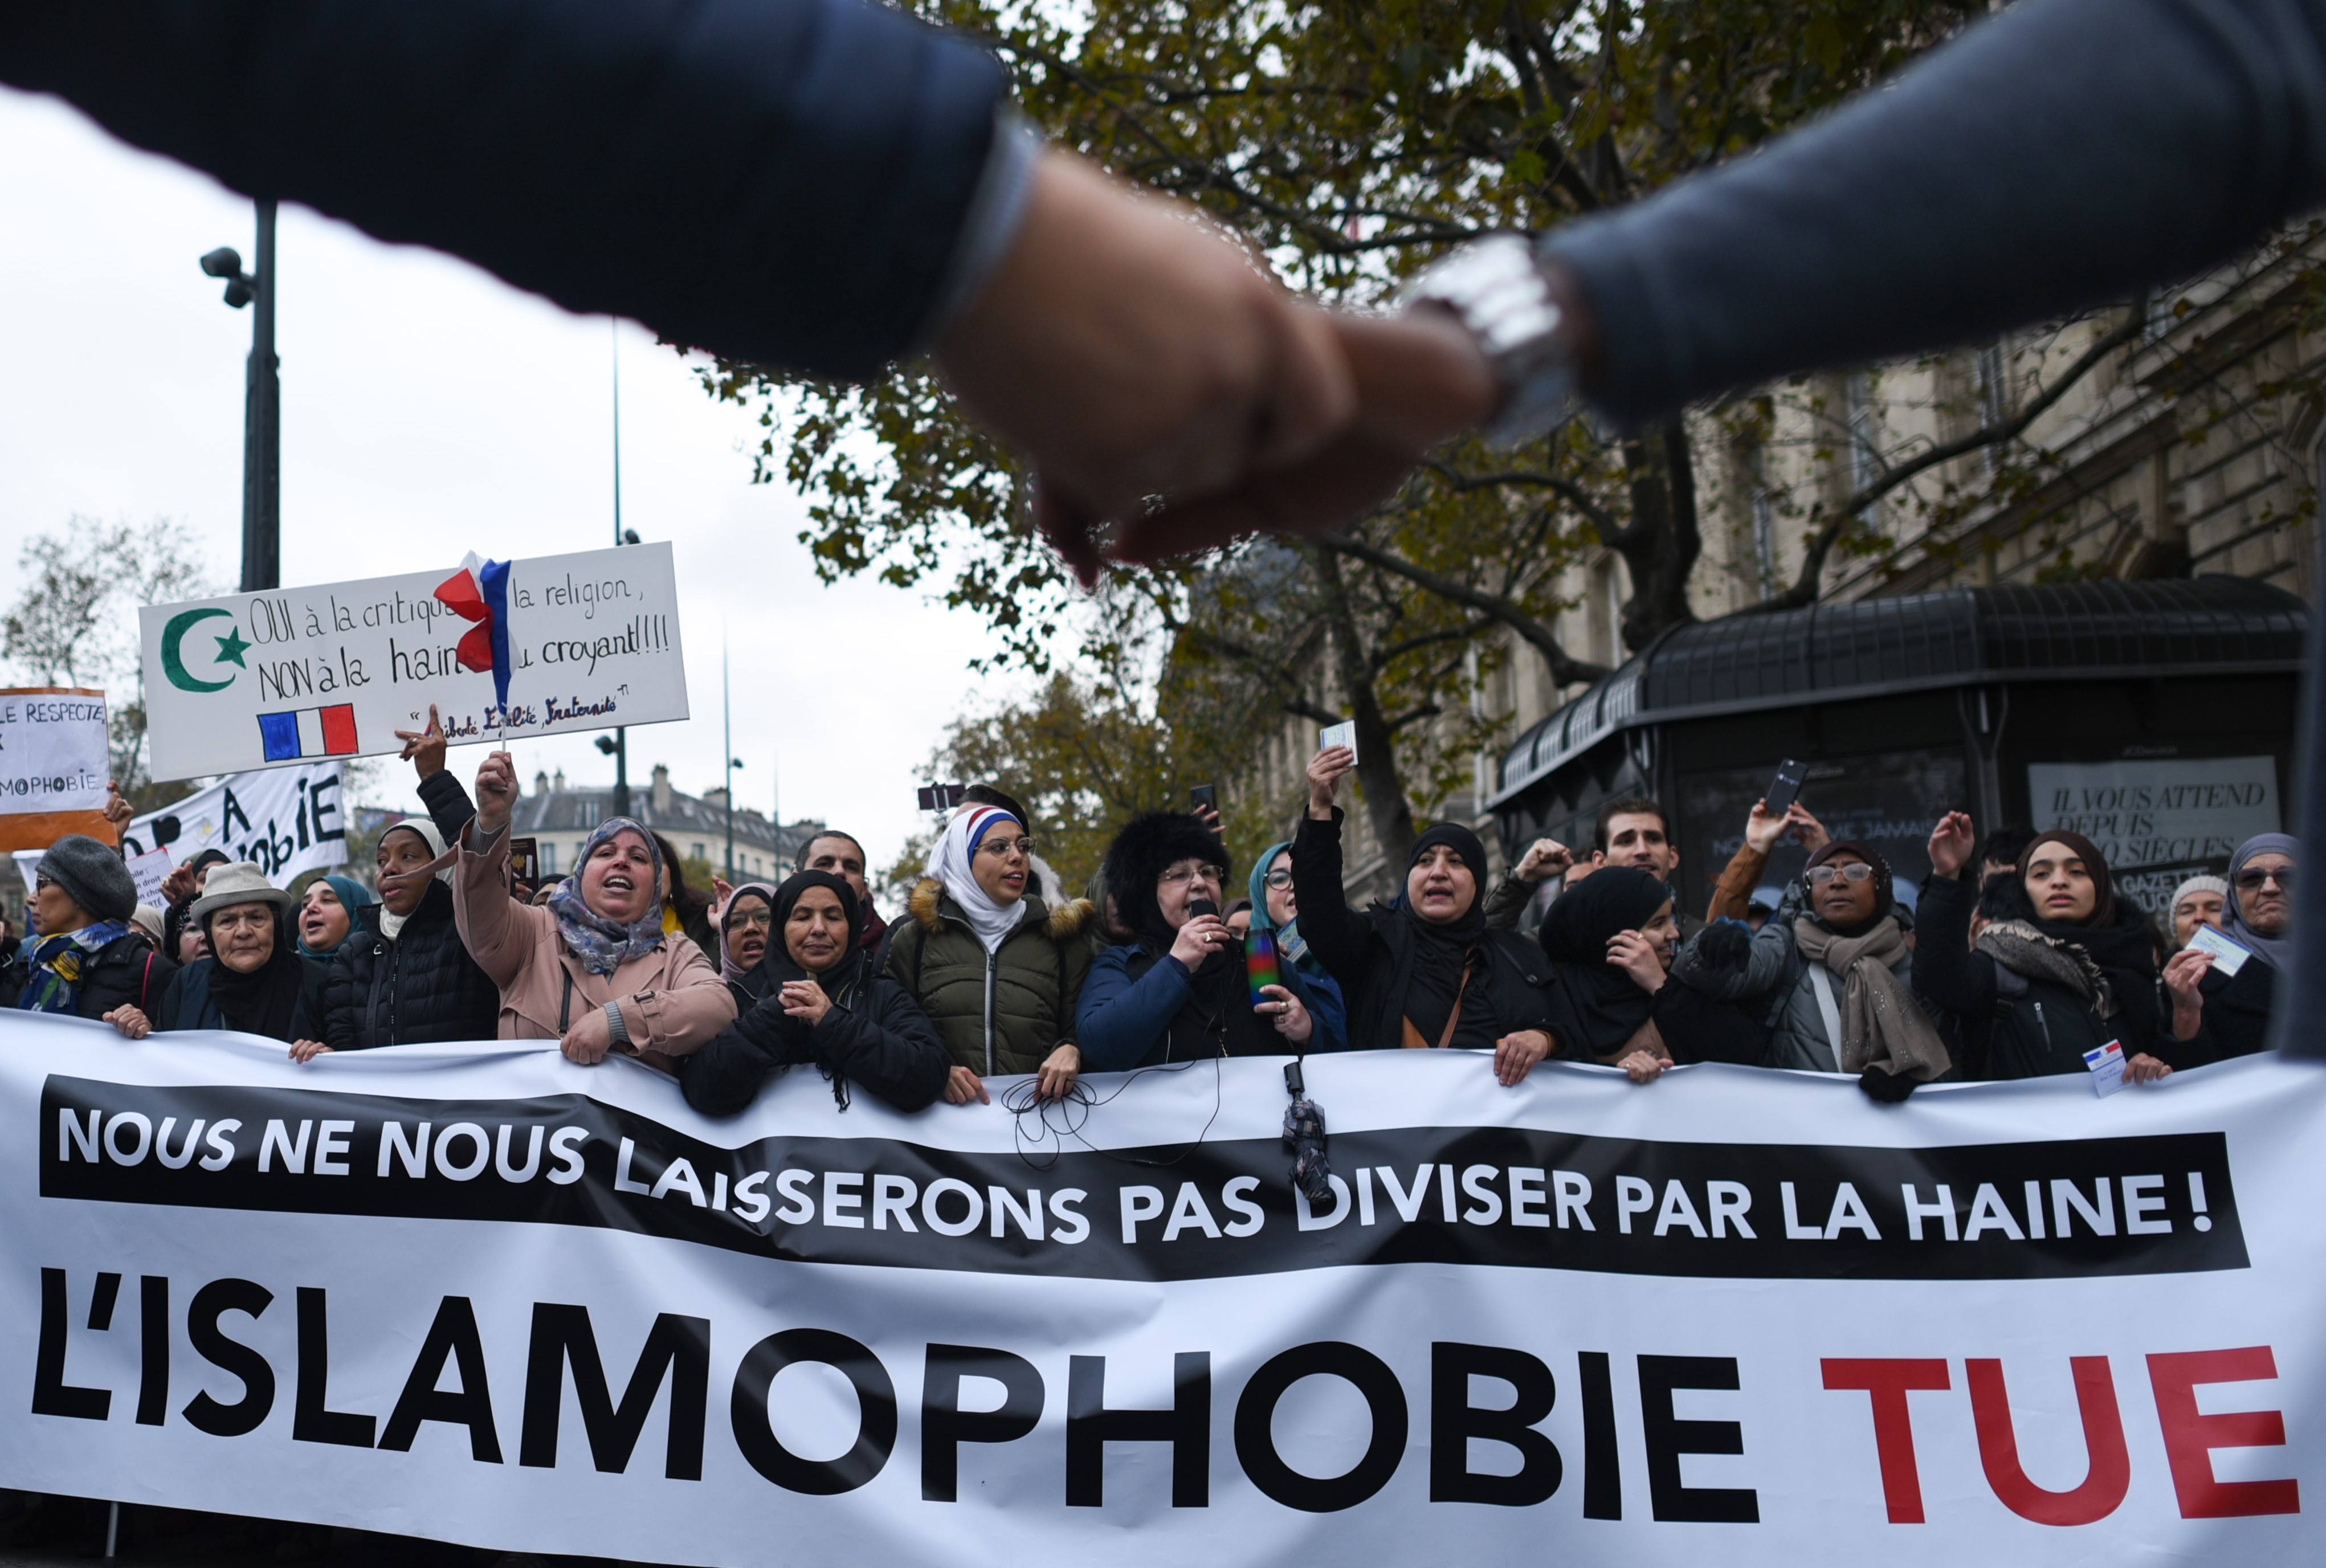 Thousands of people hold a march against islamophobia two weeks after an attack against a mosque in Bayonne and a rise in anti-Islam scaremongering in the French political class. The banner carried by the protesters reads 'Islamophobia kills'. (Reuters)